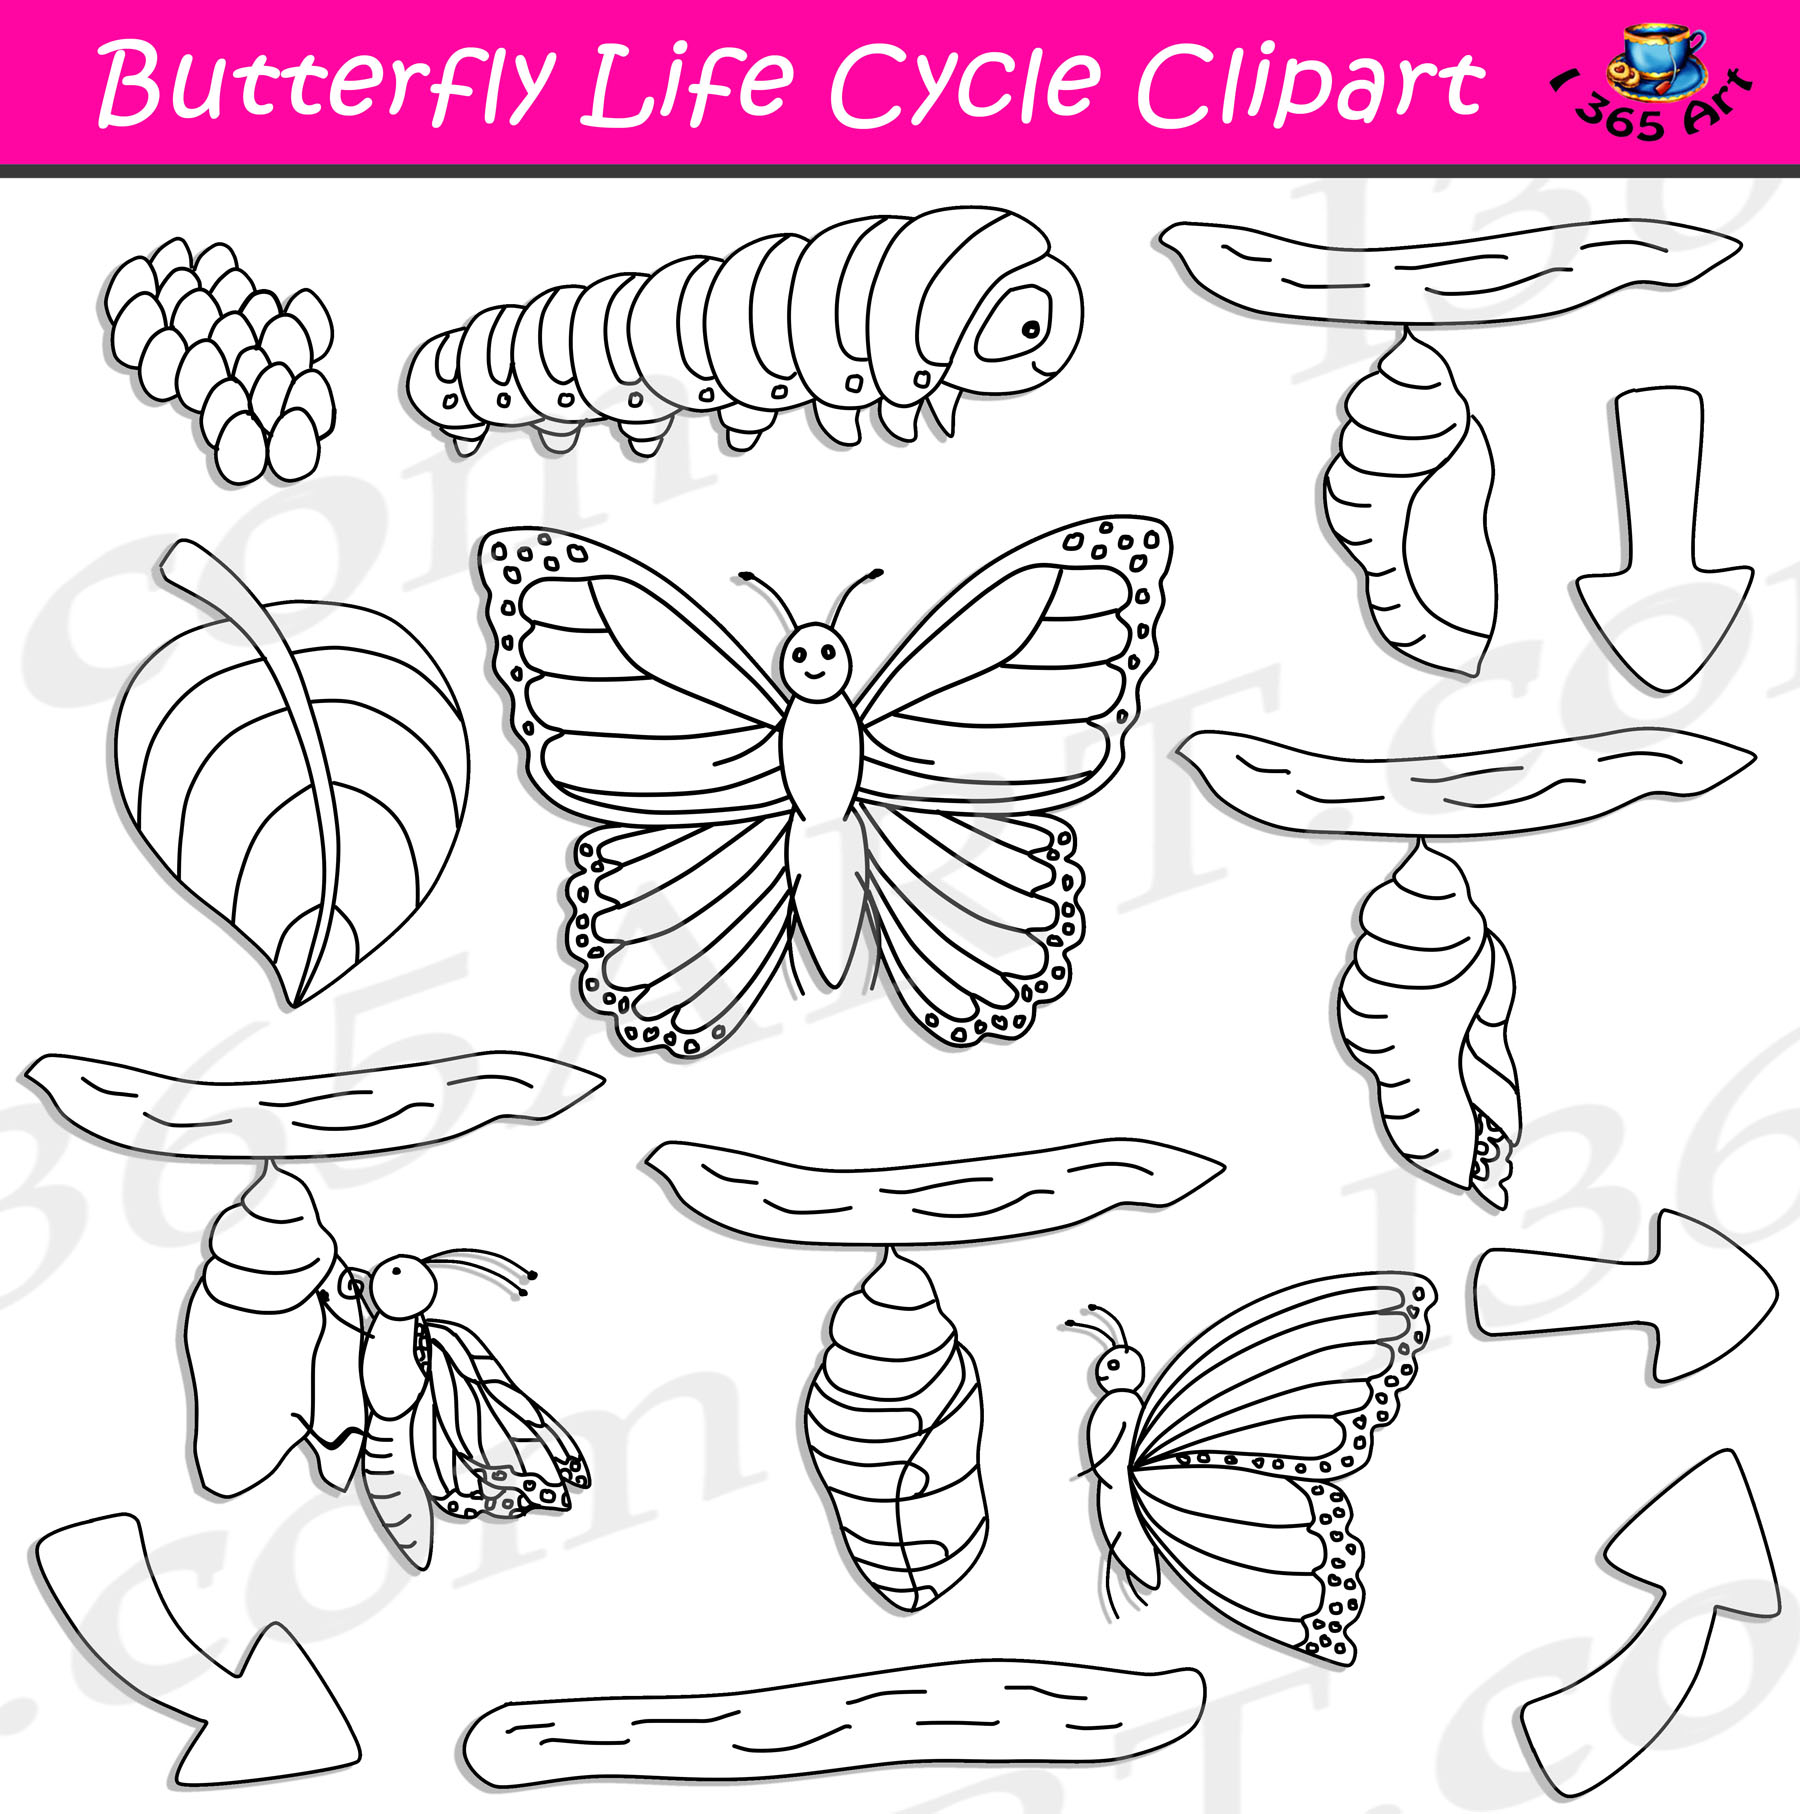 15 Free Life Cycle of a Butterfly Printables - Fun-A-Day!